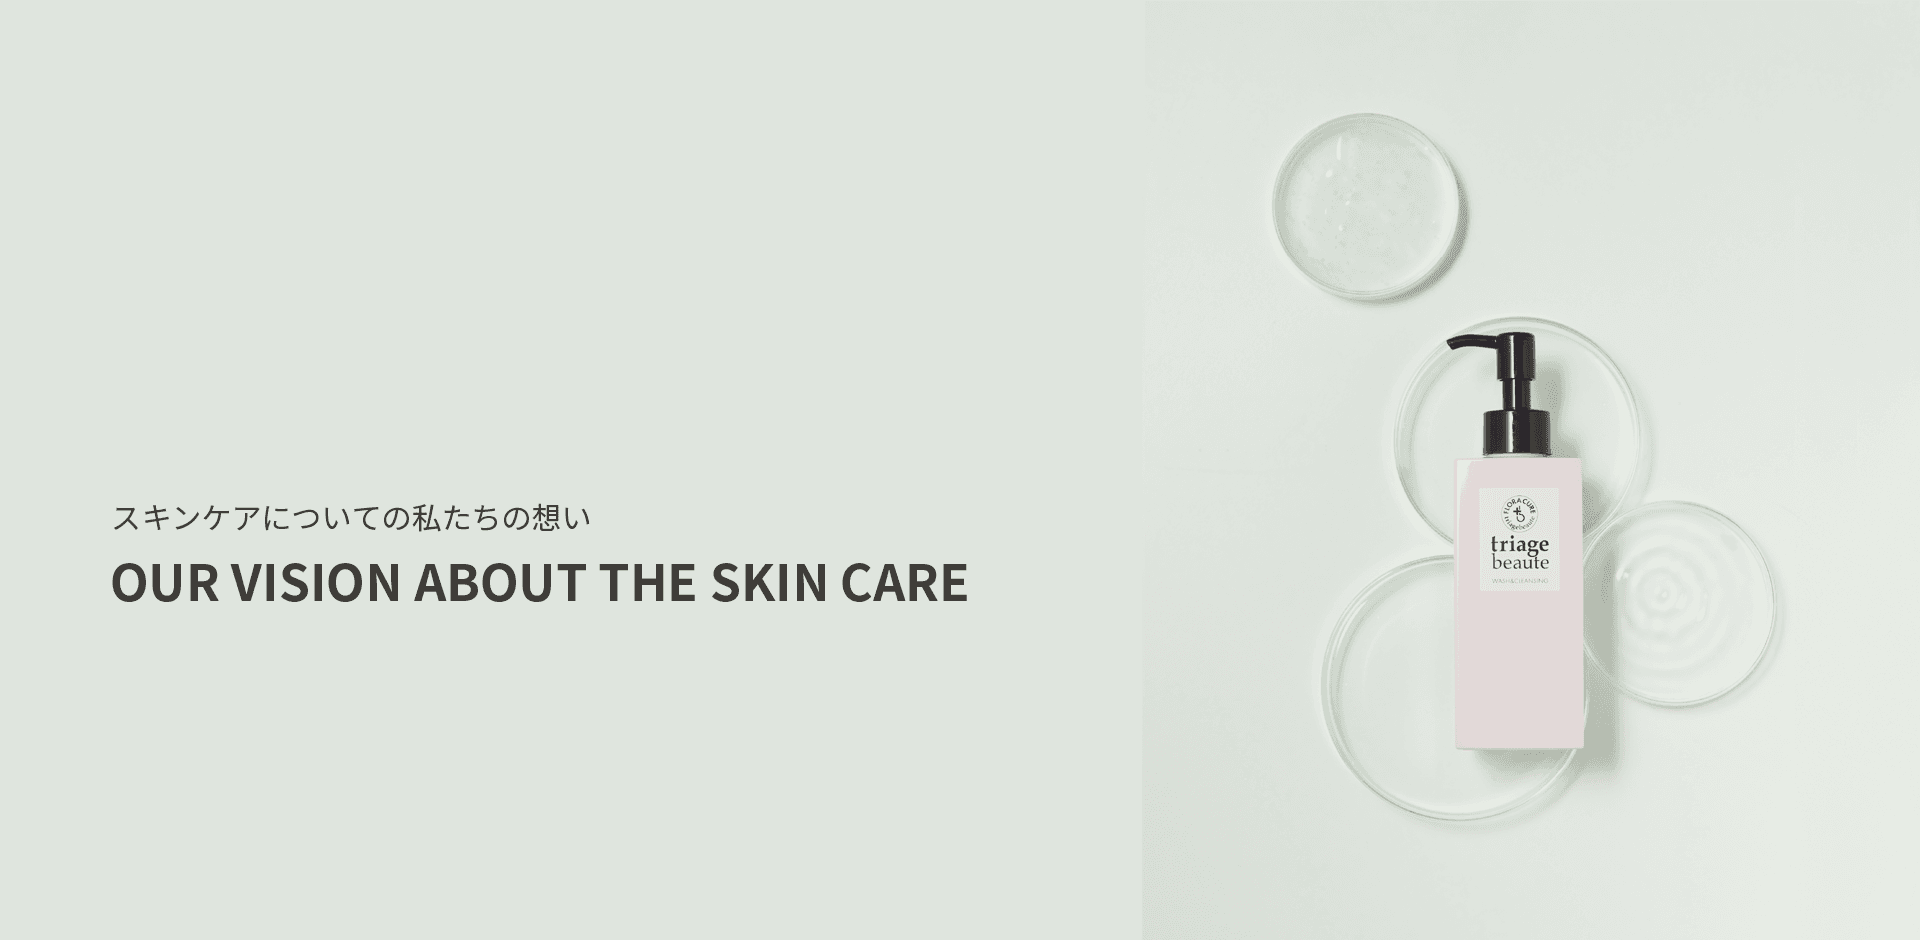 OUR VISION ABOUT THE SKIN CARE ｜ スキンケアについての私たちの想い